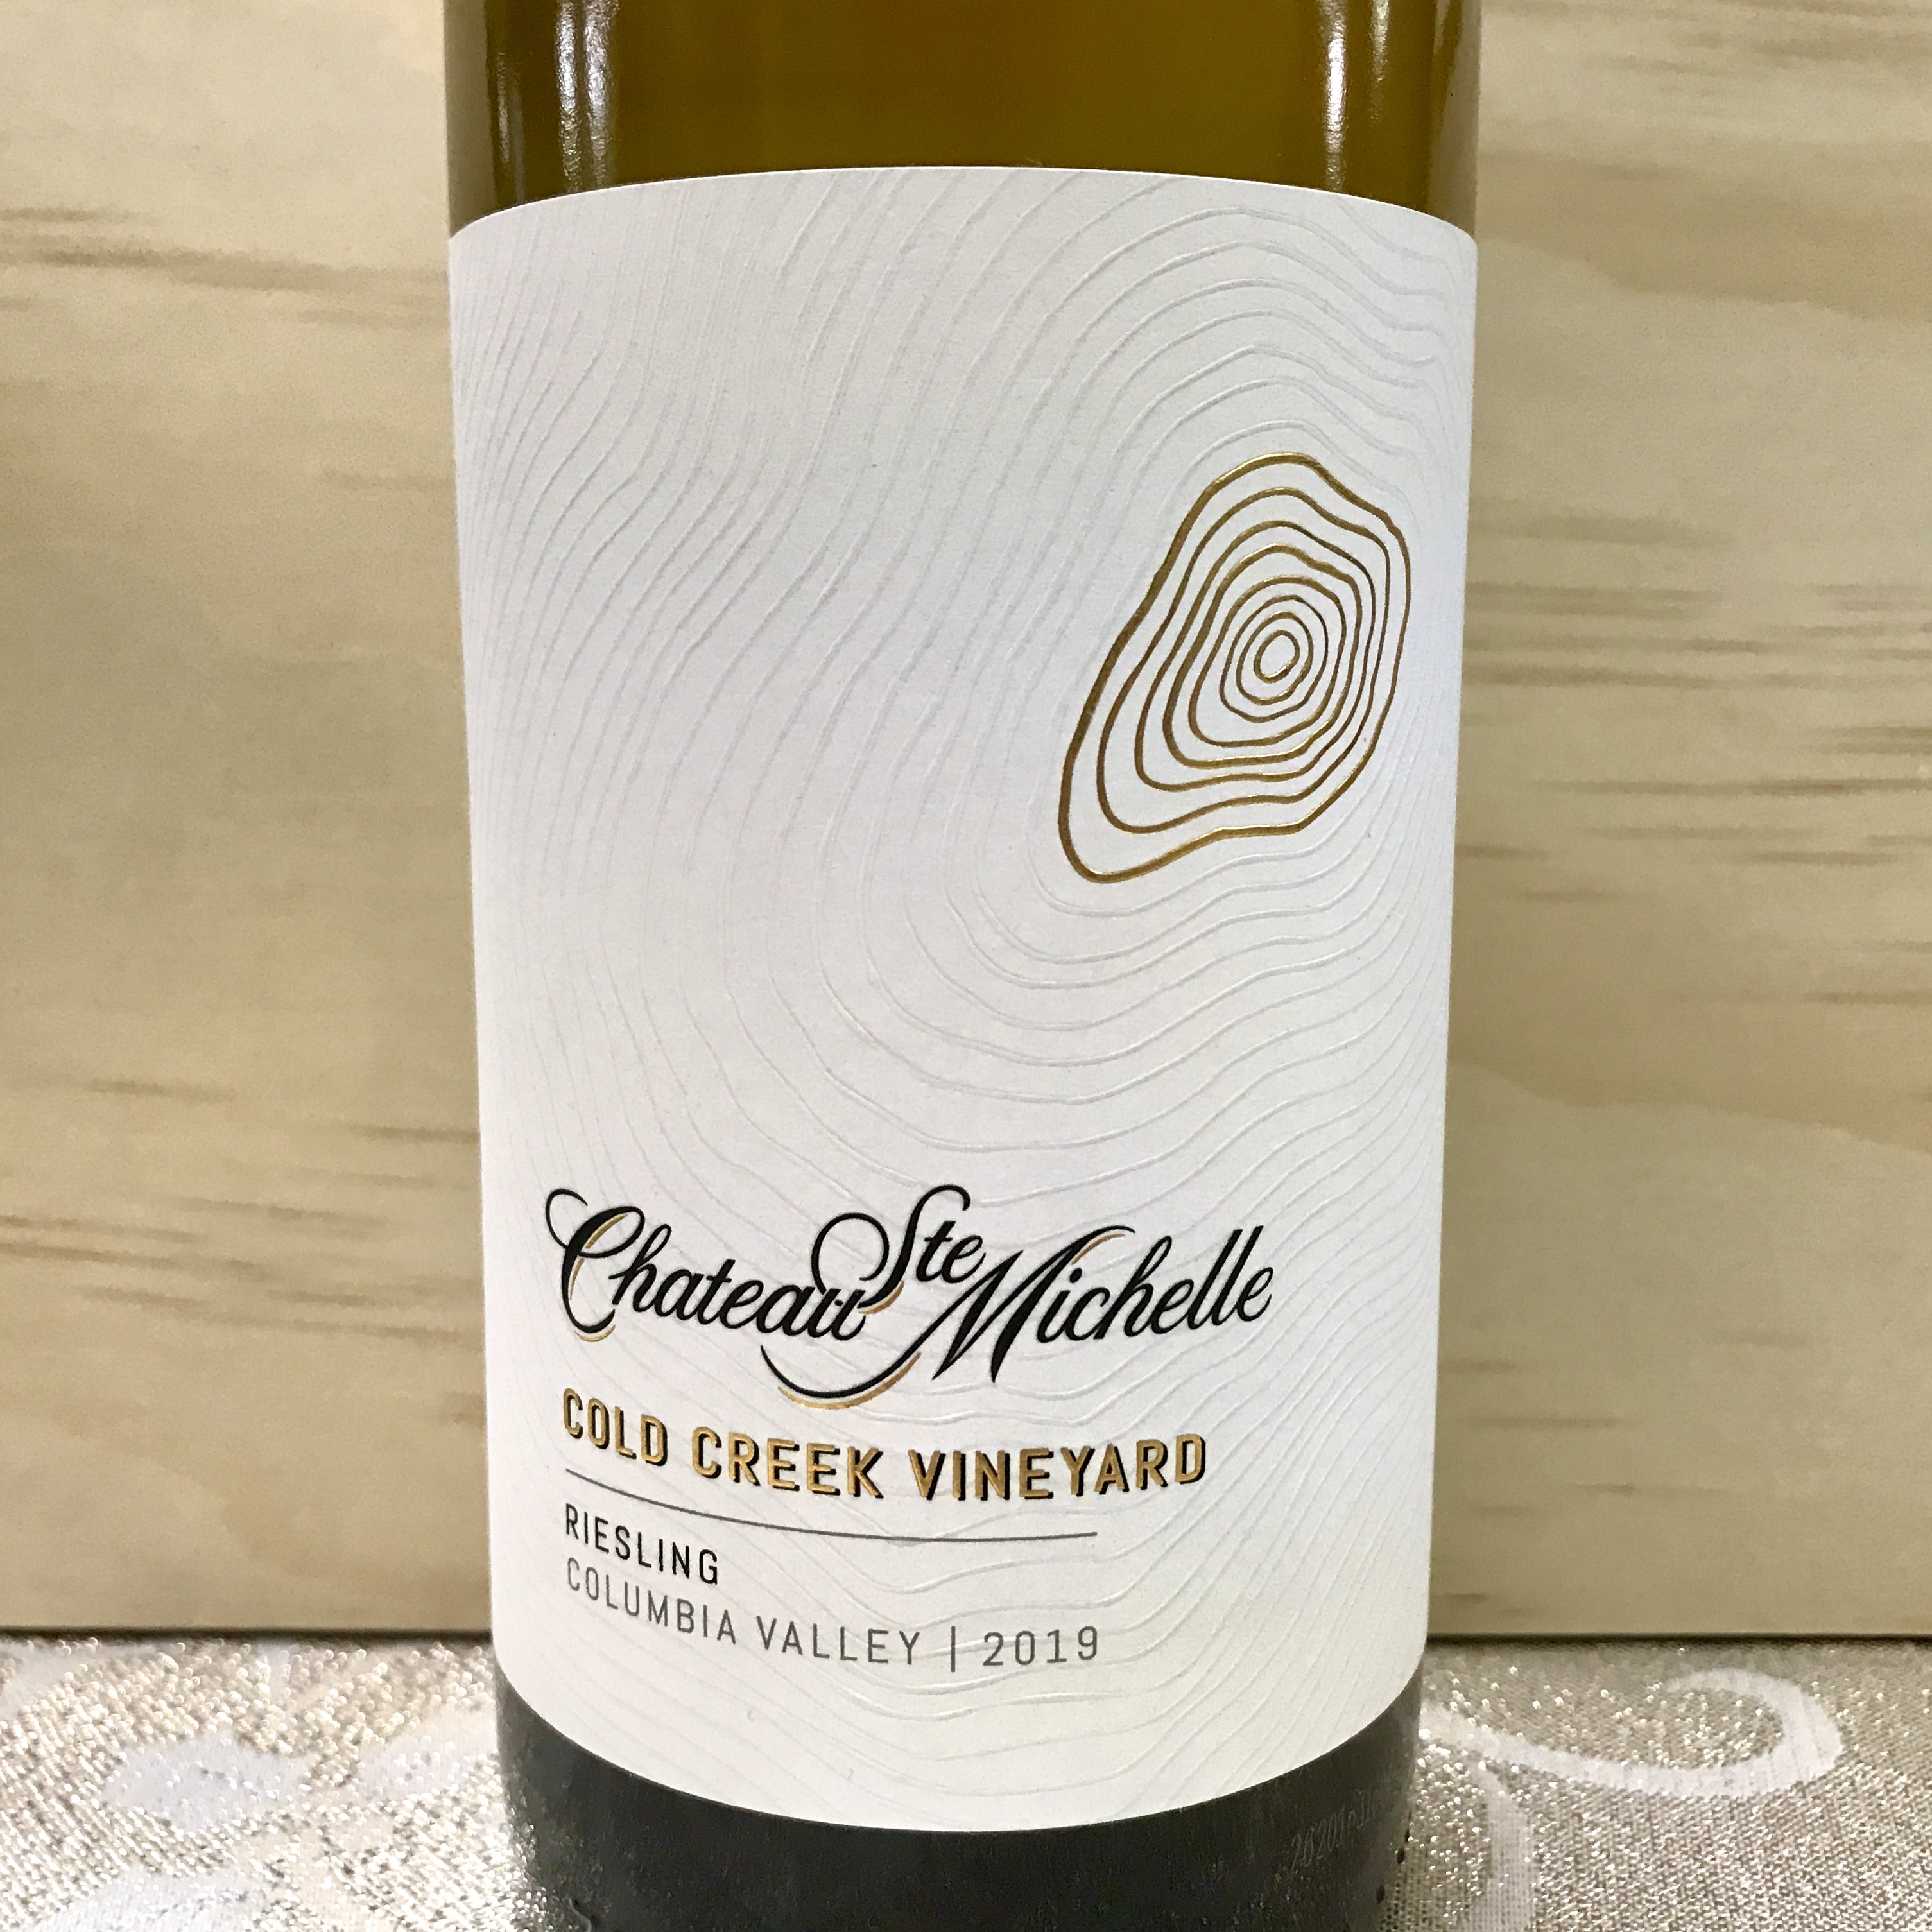 Chateau Ste. Michelle Riesling Cold Creek Vineyard 2019